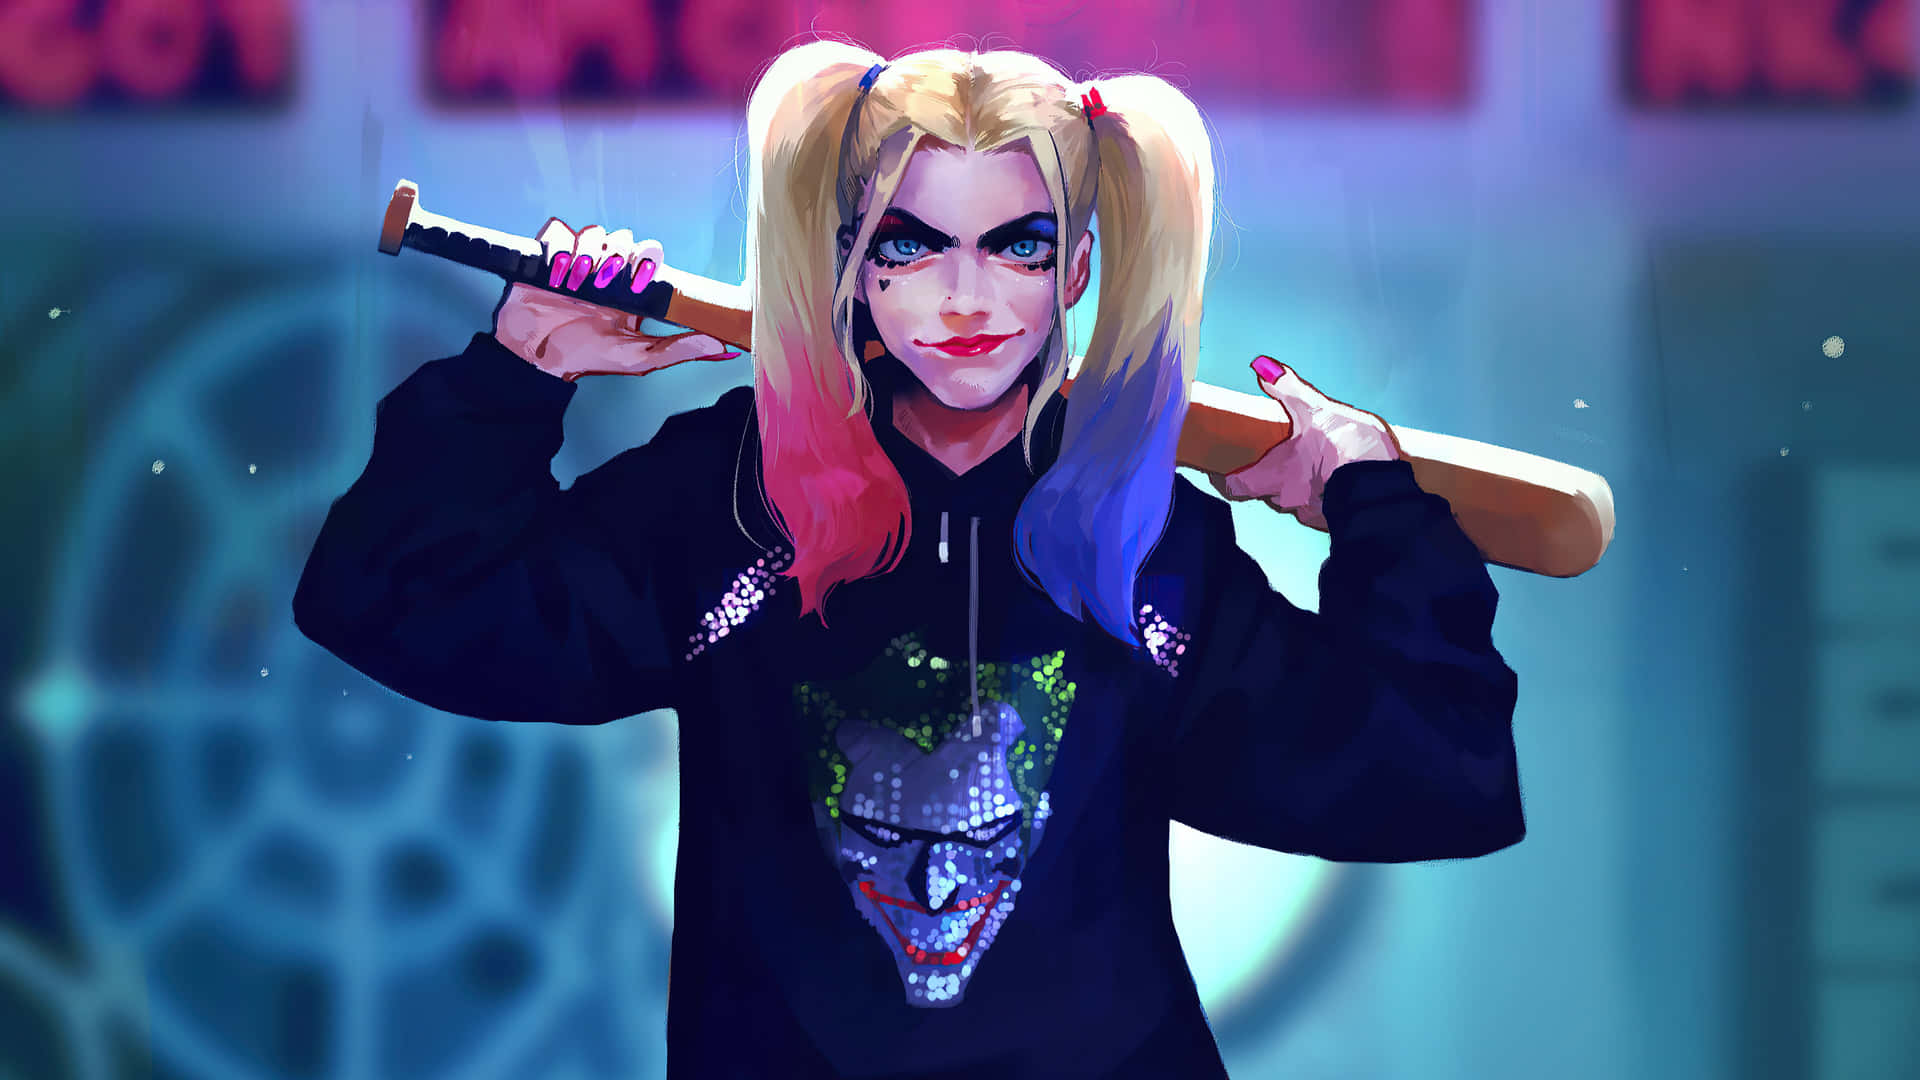 Harley Quinn wielding her iconic baseball bat in action Wallpaper